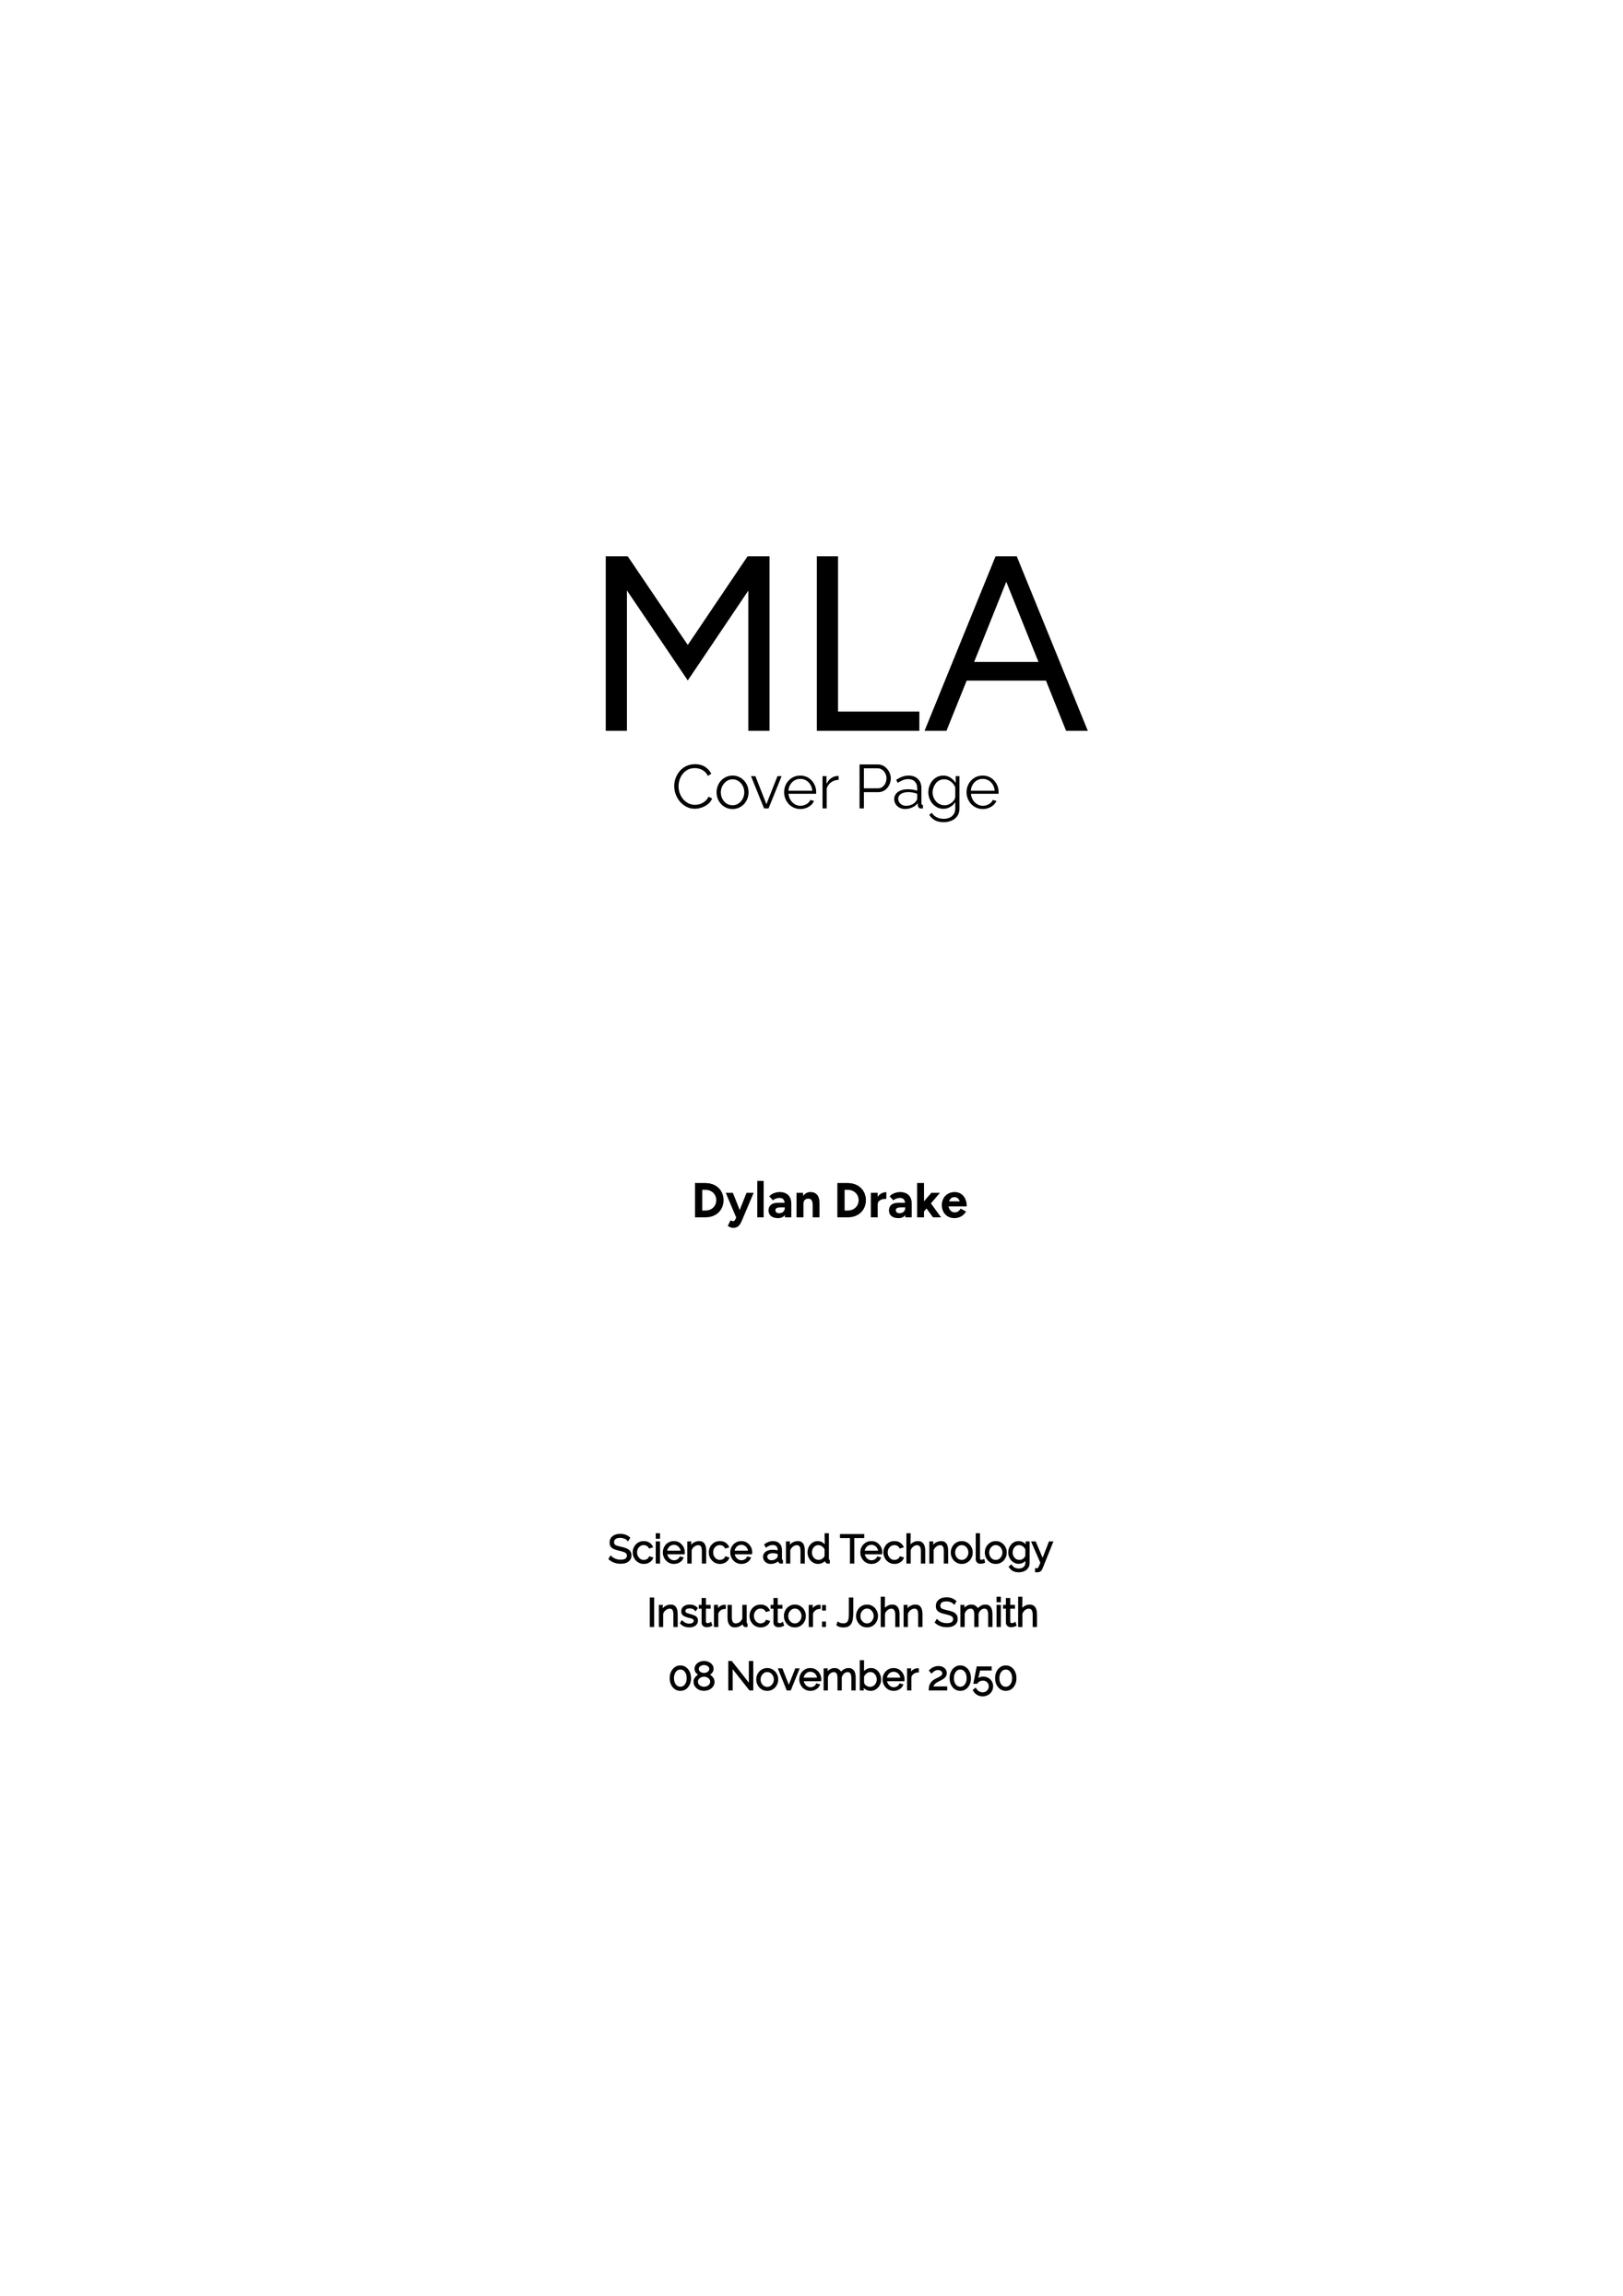 MLA Cover Page Template